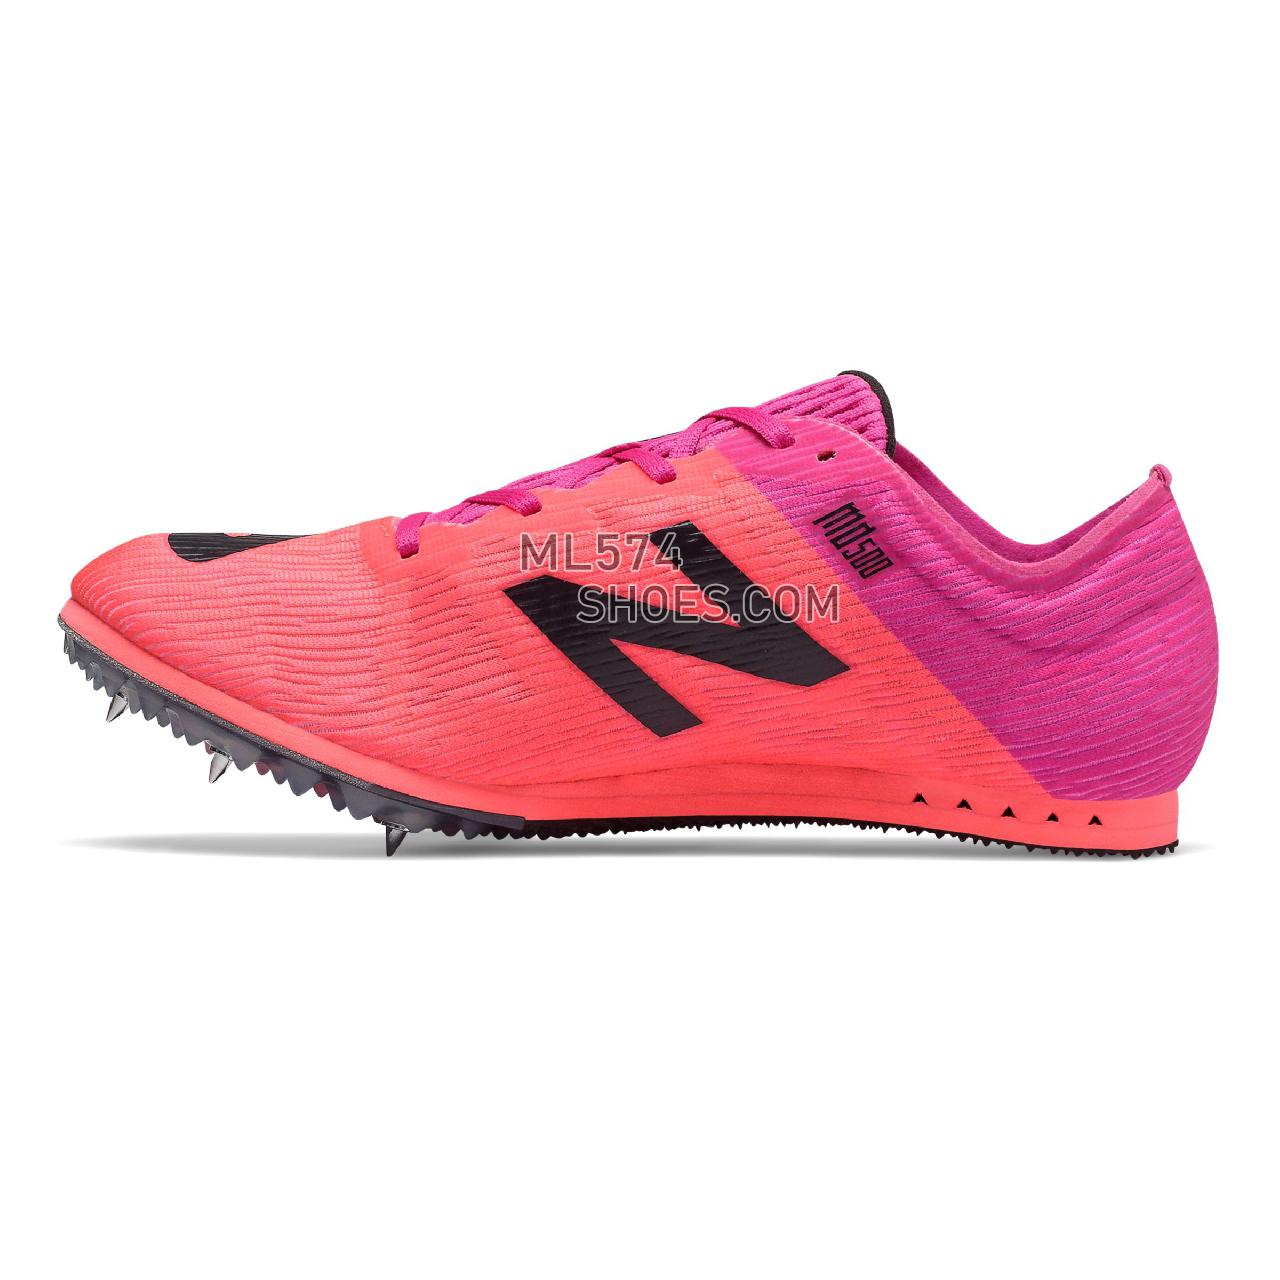 New Balance MD500v7 - Women's Track Spikes And Cross Country - Guava with Peony - WMD500P7